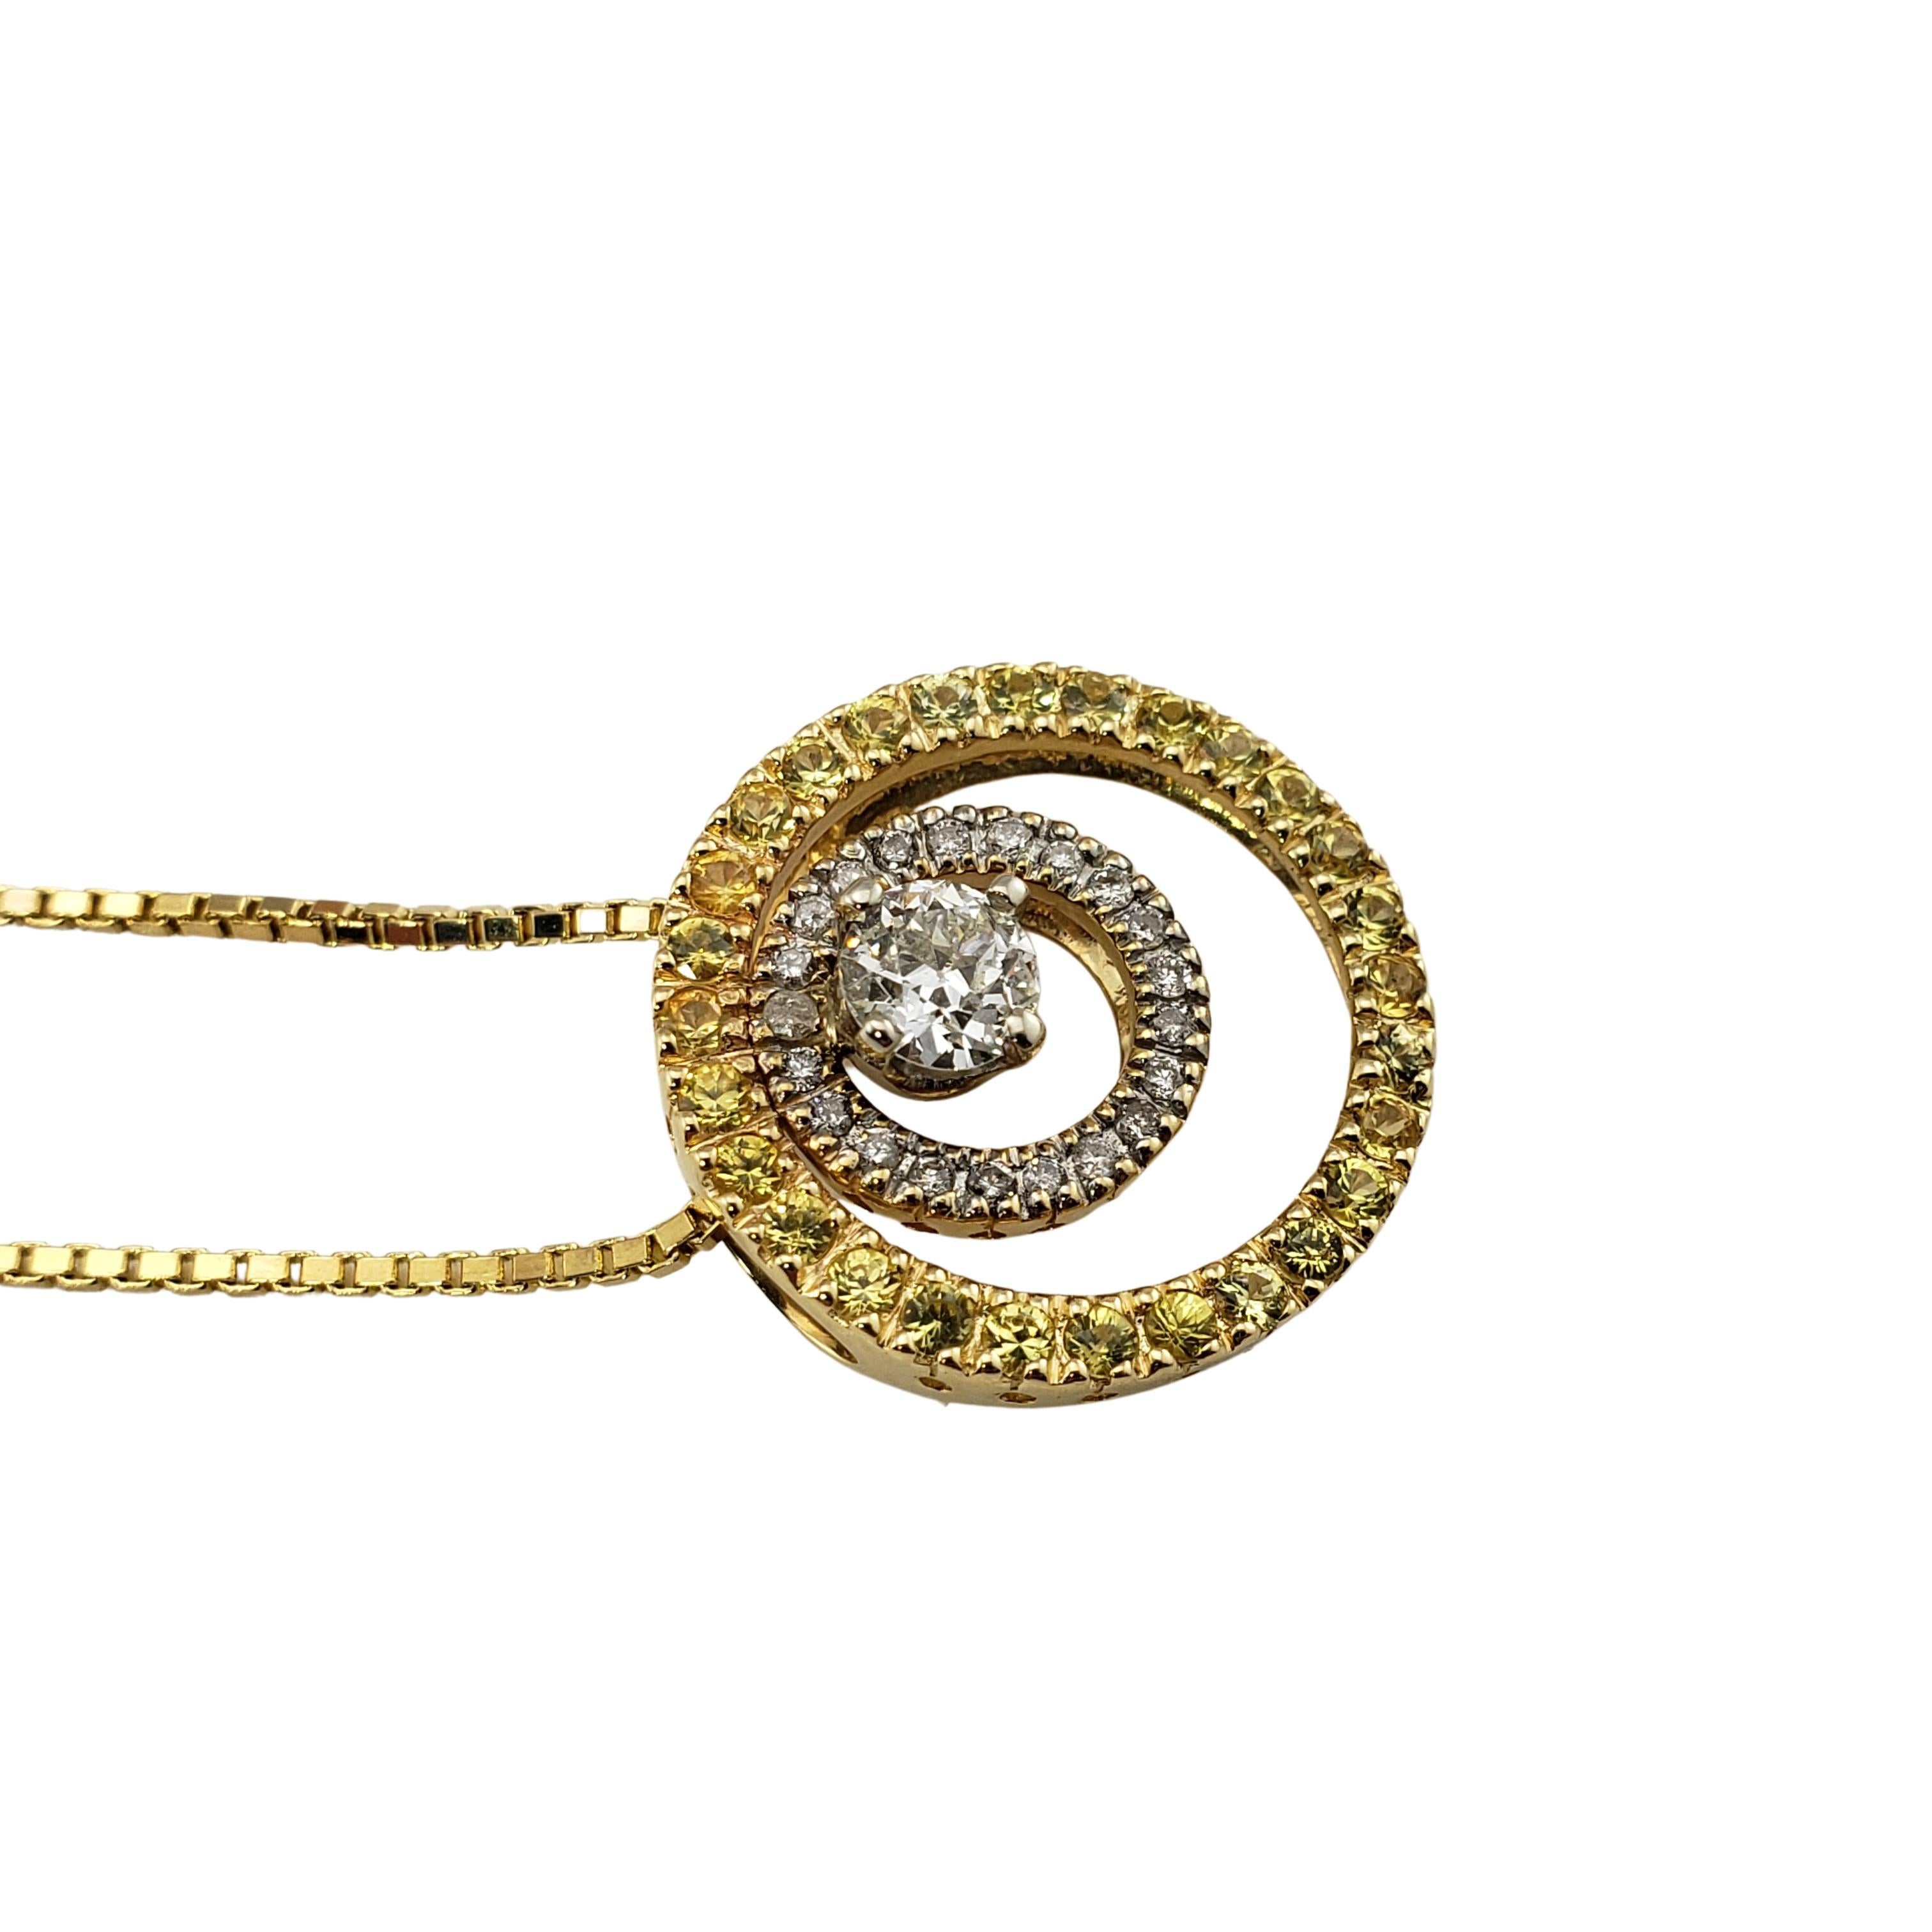 14 Karat White and Yellow Gold Diamond and Yellow Sapphire Pendant Necklace GAI Certified-

This sparkling pendant features round brilliant cut diamonds and yellow sapphires  set in beautifully detailed 14K white and yellow gold.  Suspends from a